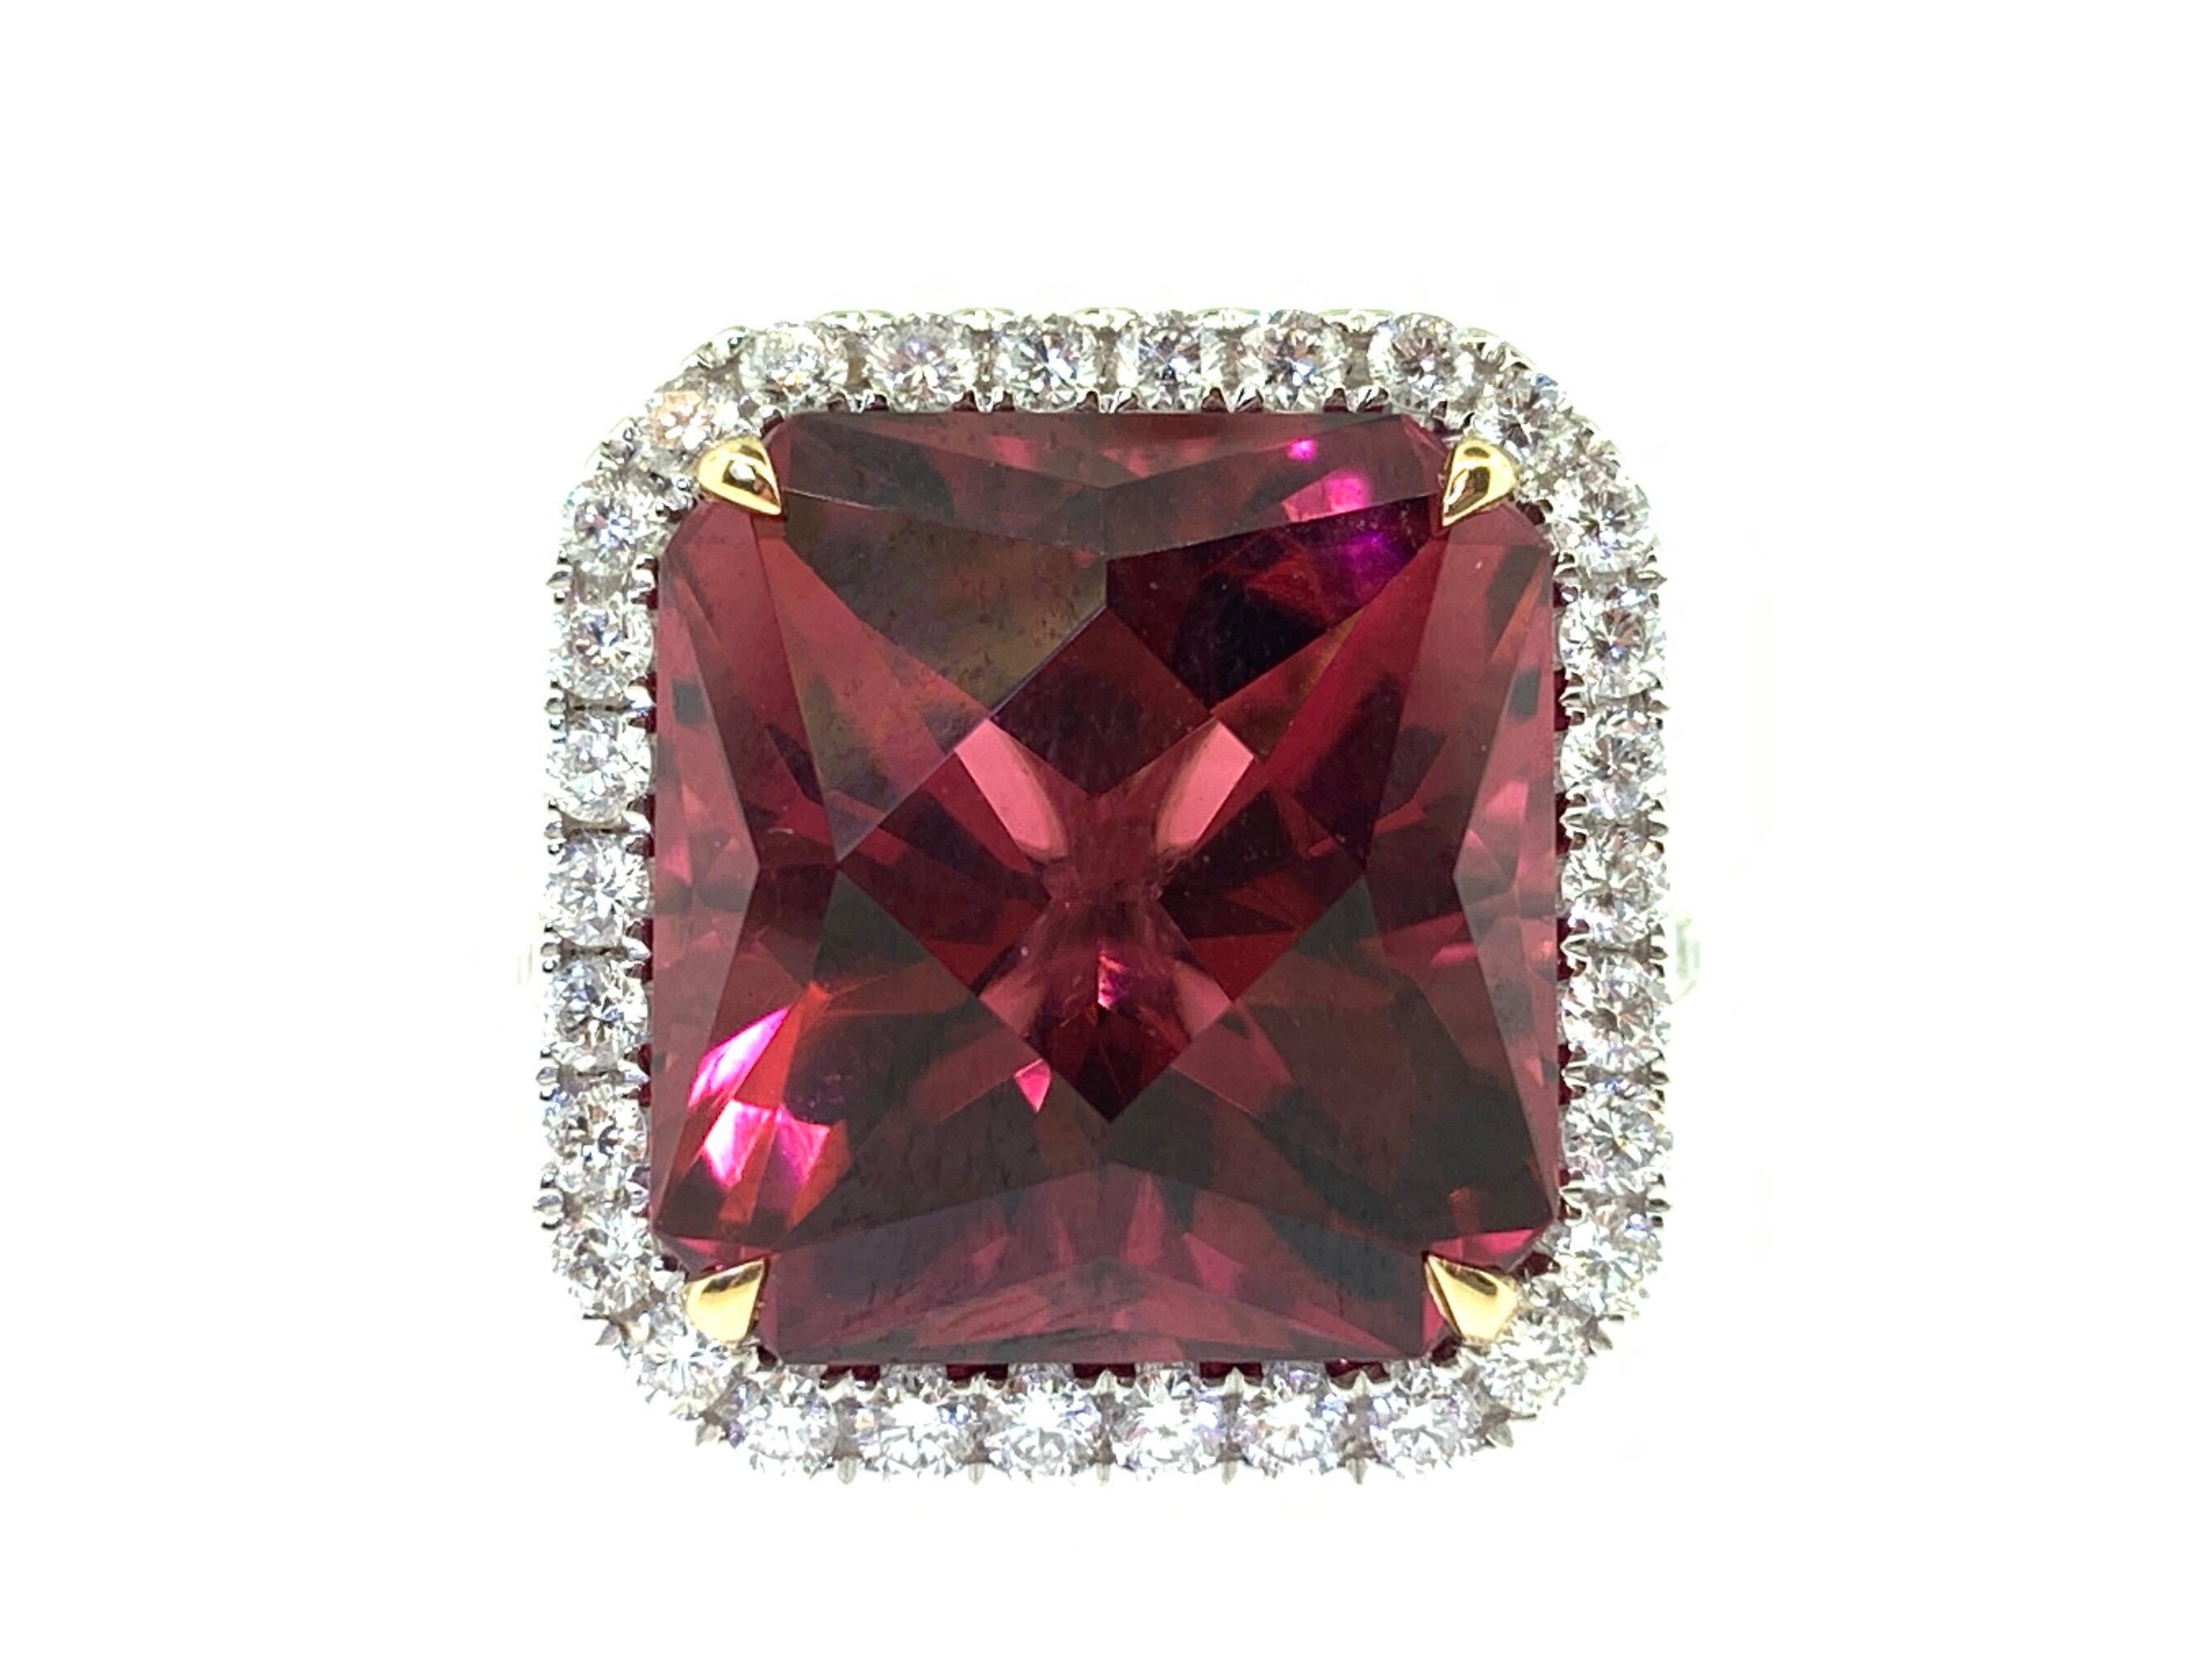 This stunning cocktail ring features a beautiful 11.76 Carat Emerald Cut Rubellite Tourmaline with a Diamond Halo and sits on a Diamond Shank. The ring is set in 18k white gold. with 18k yellow gold prongs on the center stone. Ring size is 6 1/2.